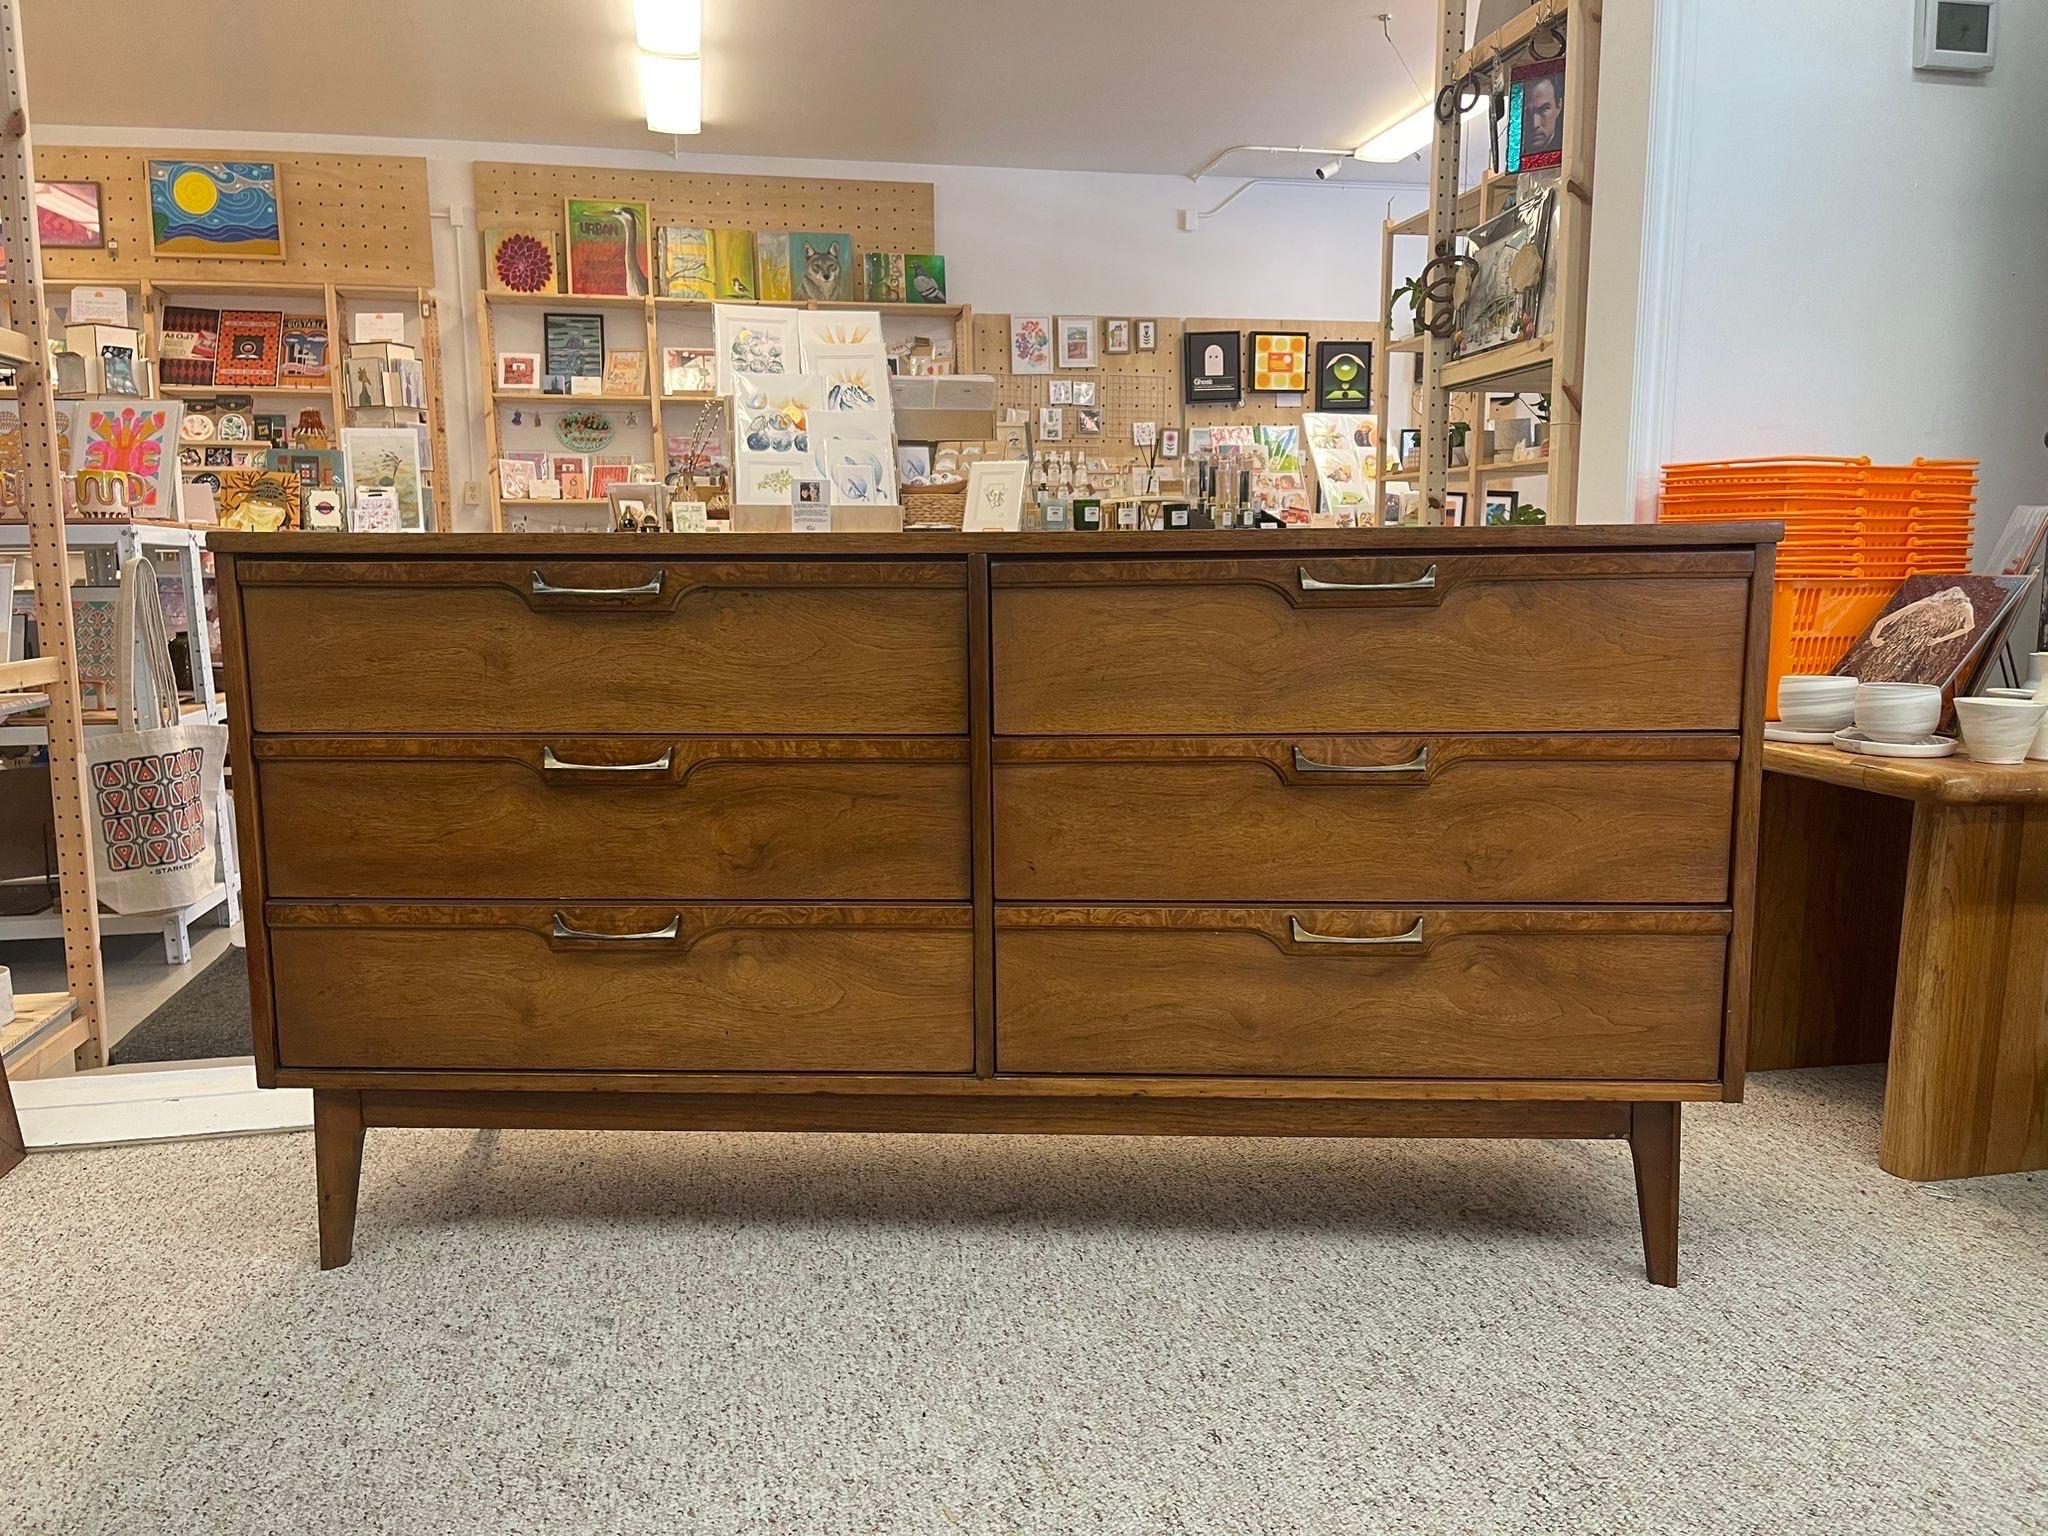 Walnut Toned six drawer dresser features Brass toned angled pulls accenting Burl wood highlights across the top of each drawer. Classic Tapered Legs and dovetailed drawers. Vintage Condition Consistent with Age as Pictured.

Dimensions. 60 W ; 18 D